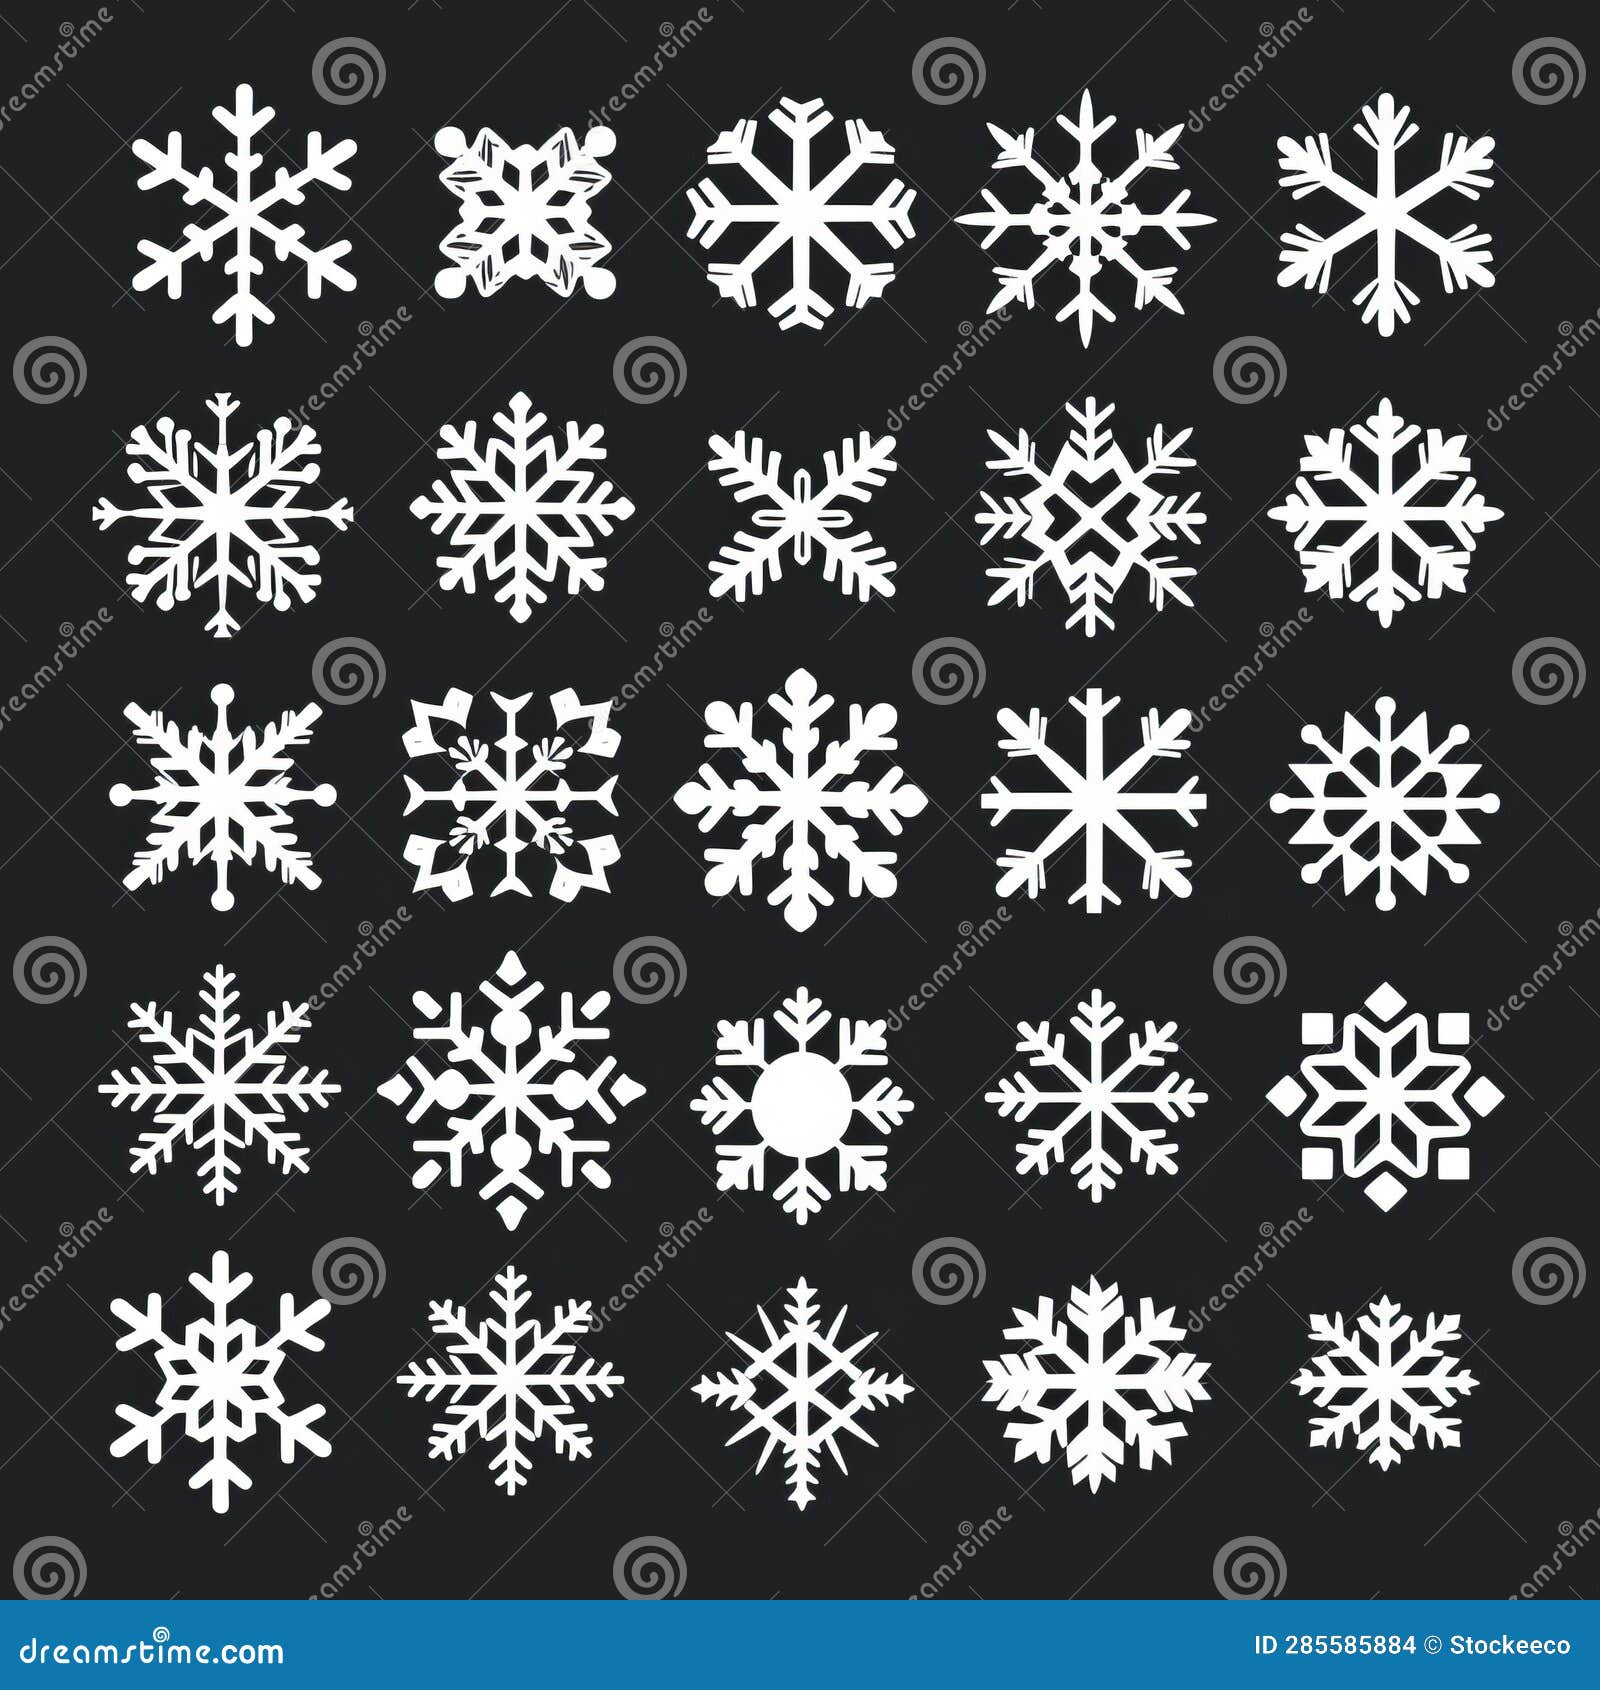 simple snowflake s:  icon set in flat shading style